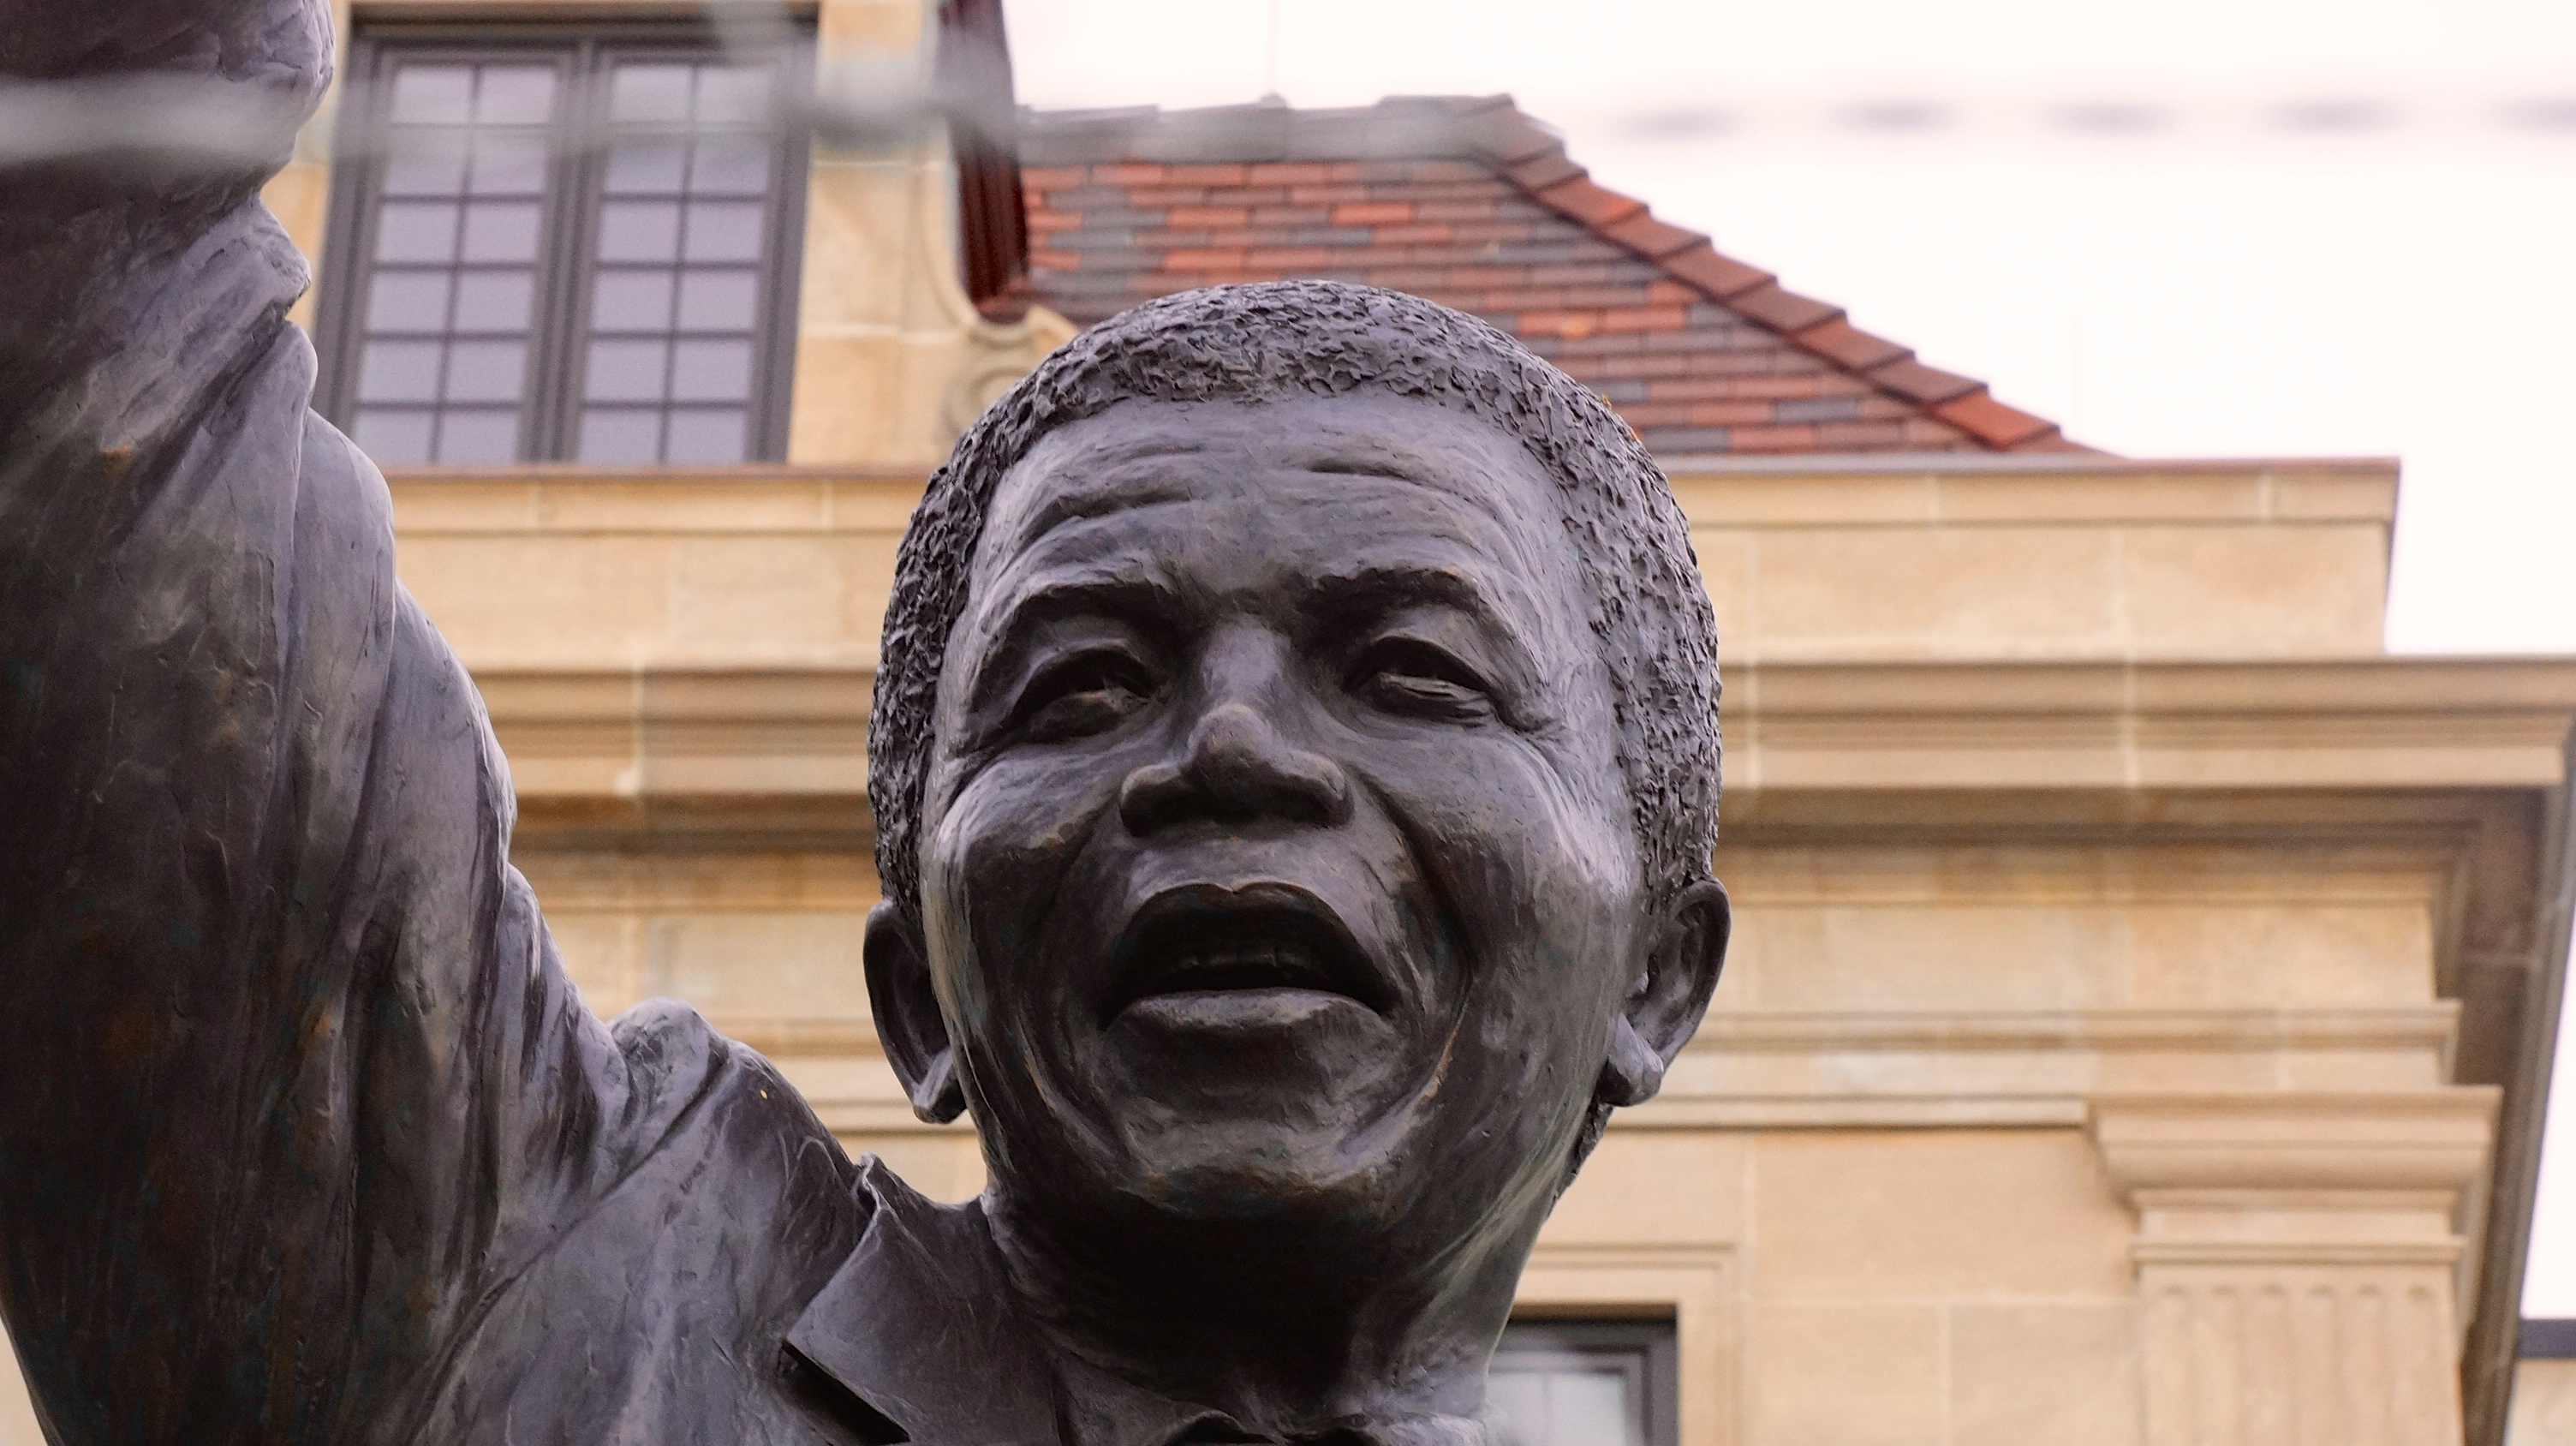 A statue of Nelson Mandela in front of the South African Embassy in Washington, DC. Photo: Ted Eytan / flickr